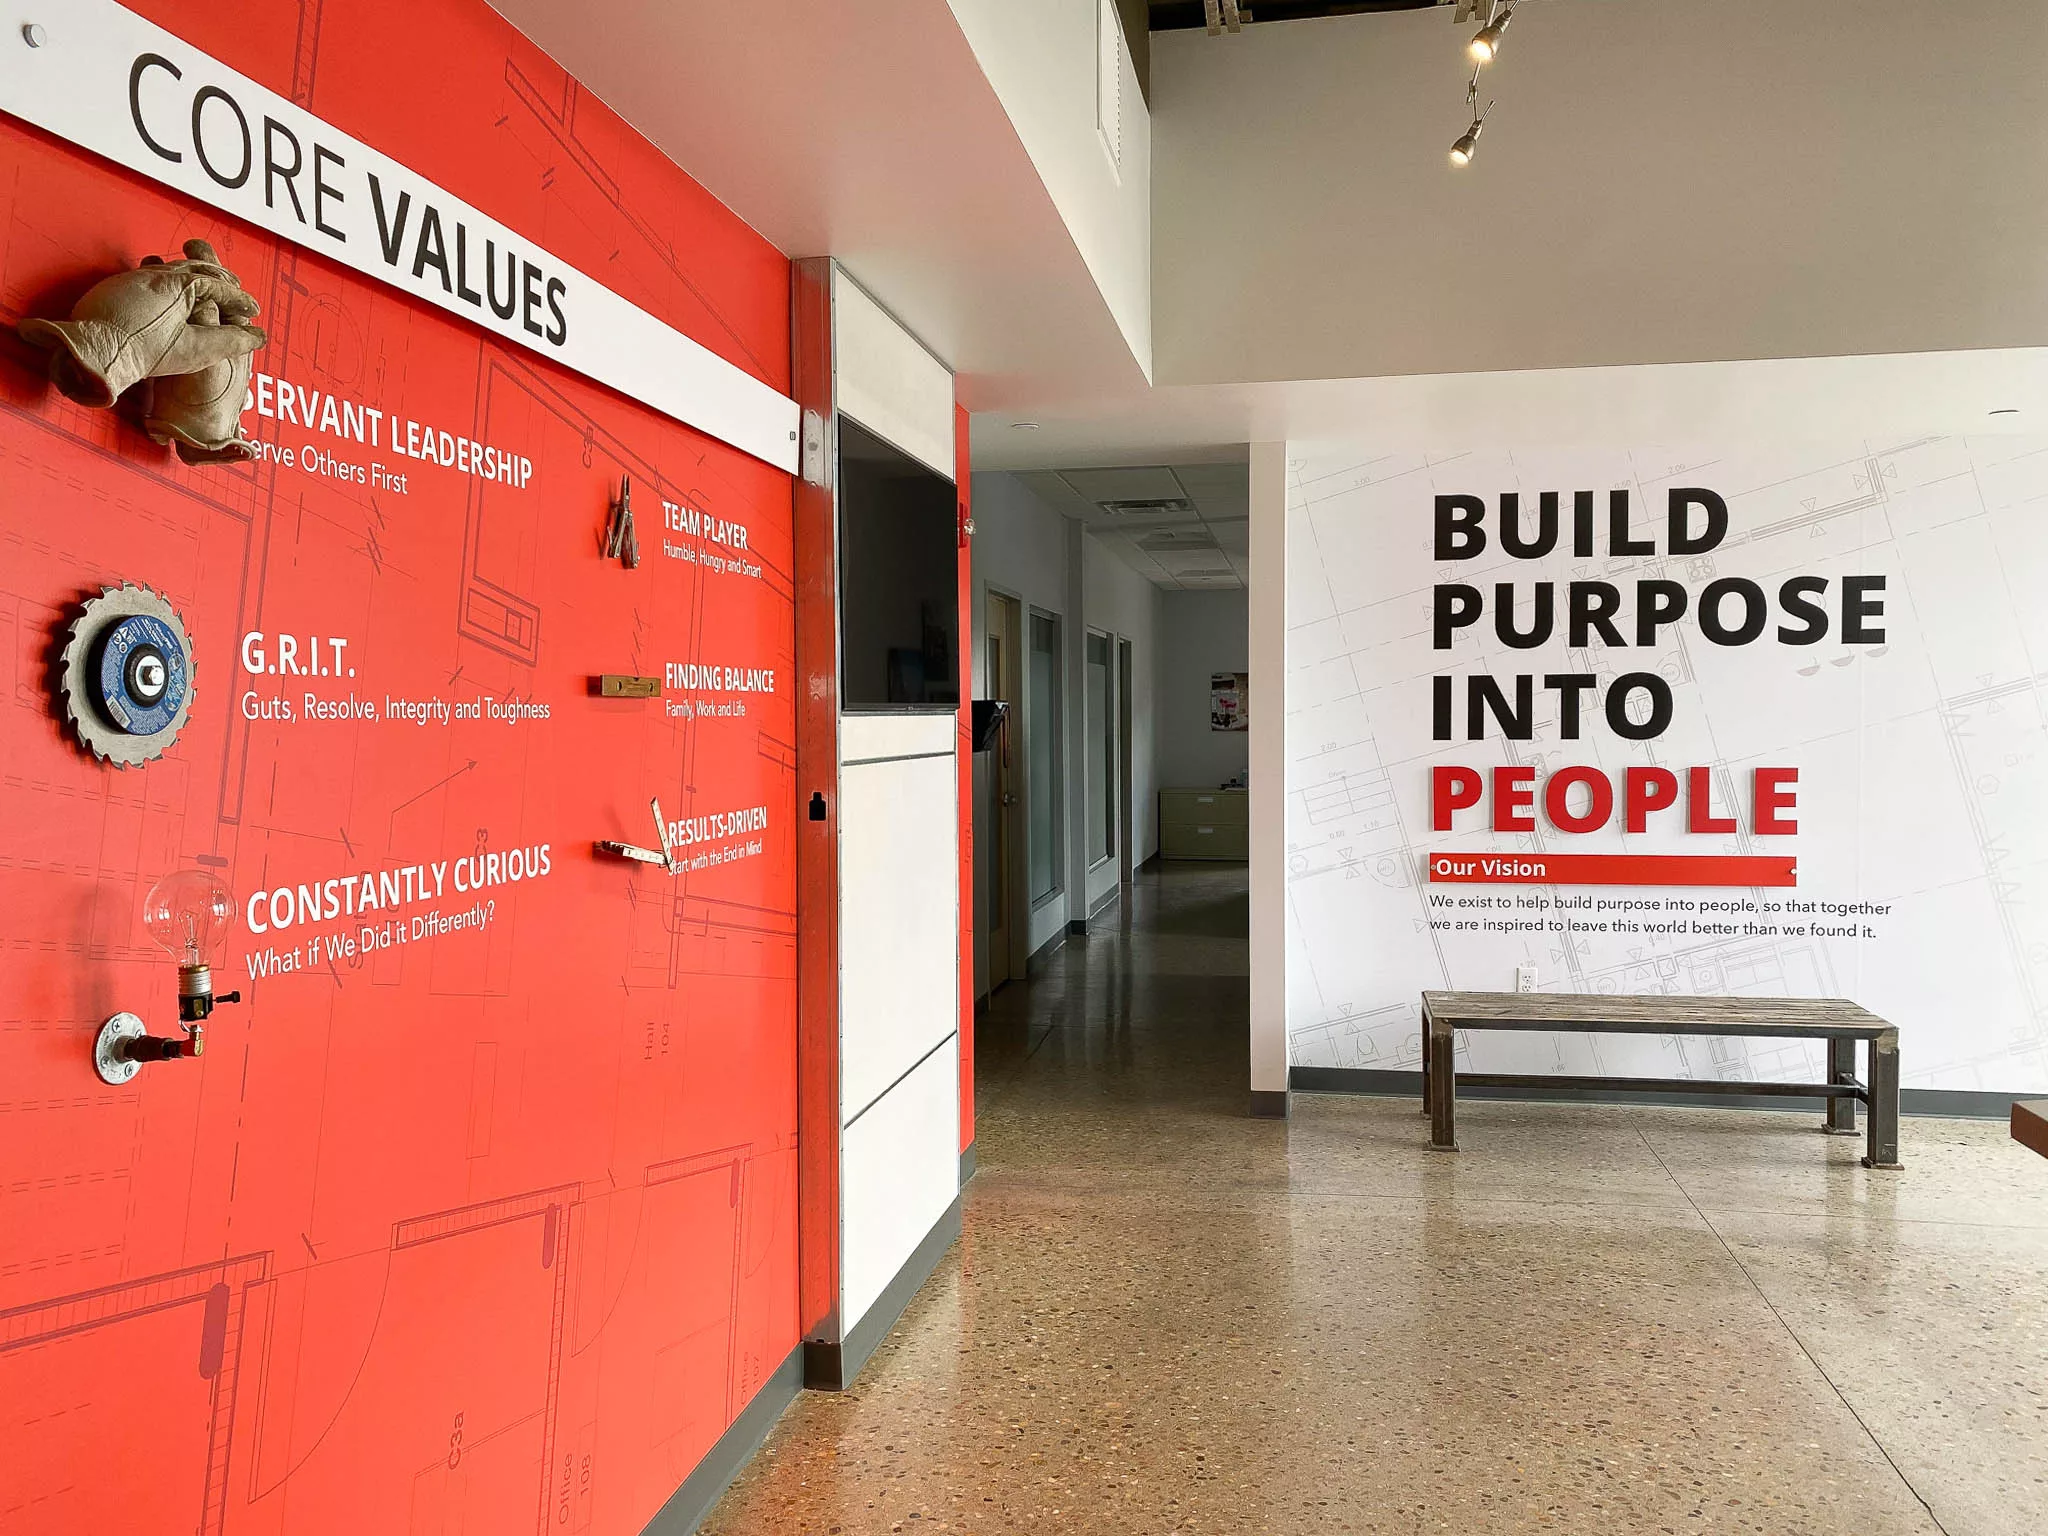 Core Values and Build Purpose into people wall at elder construction